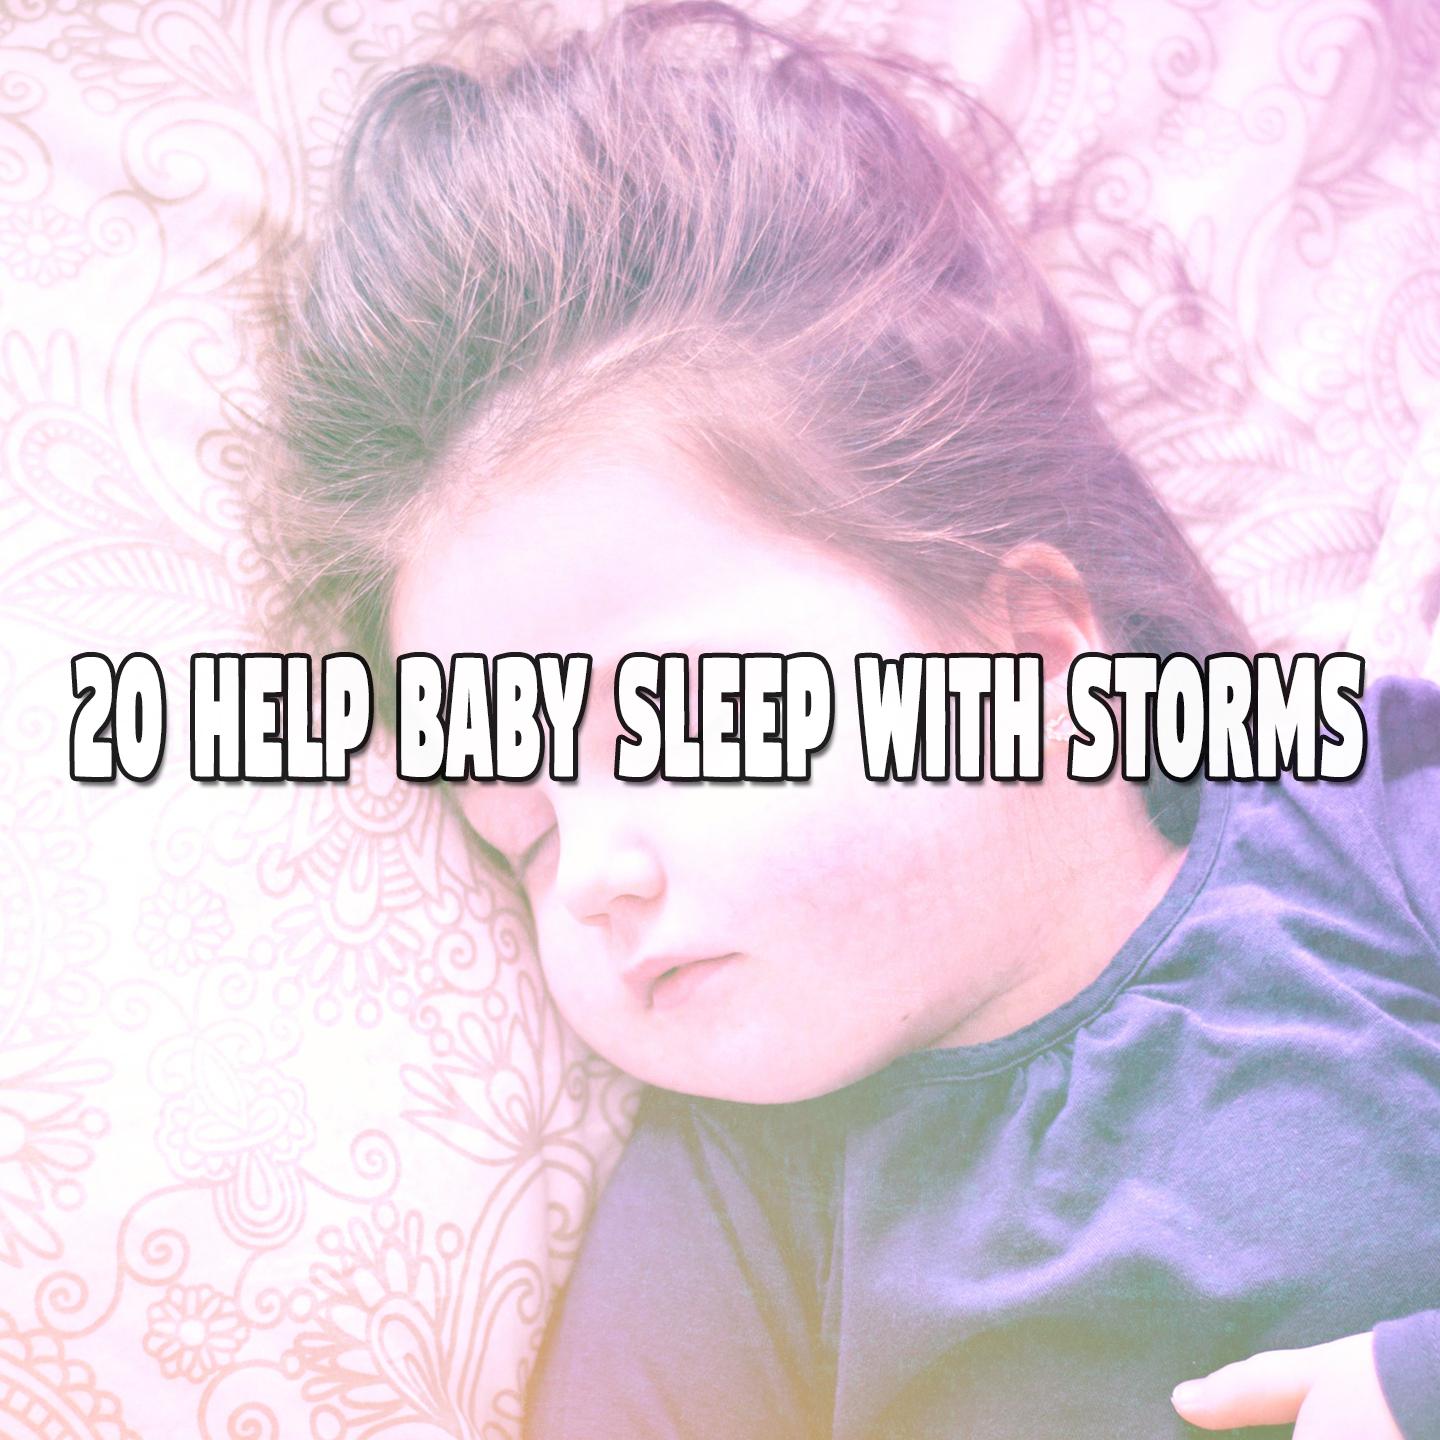 20 Help Baby Sleep with Storms